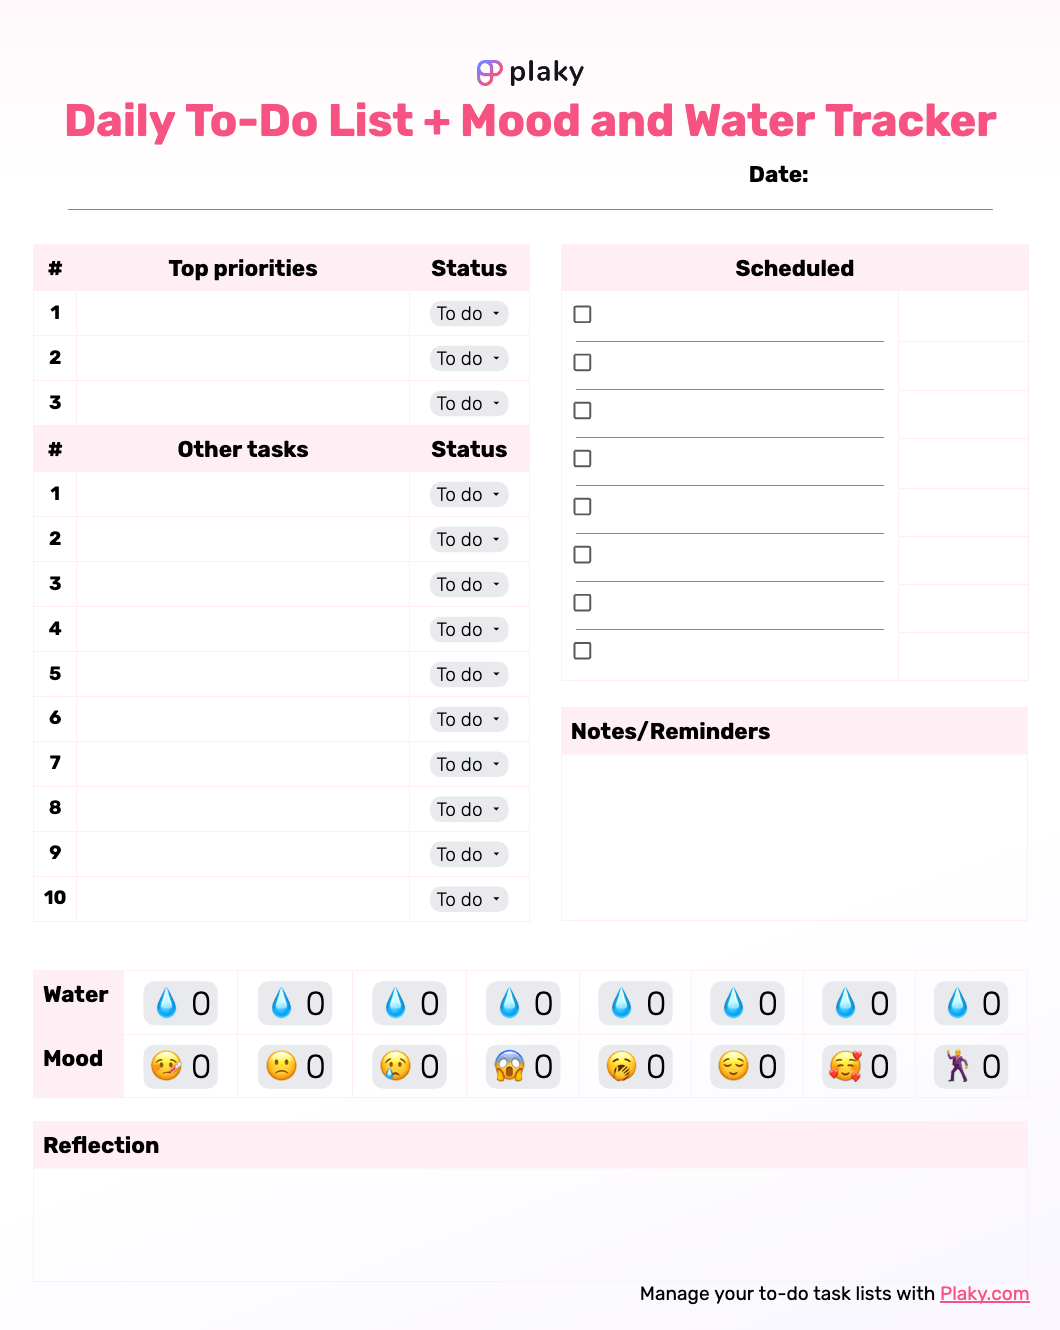 Daily to-do list template + mood and water tracker